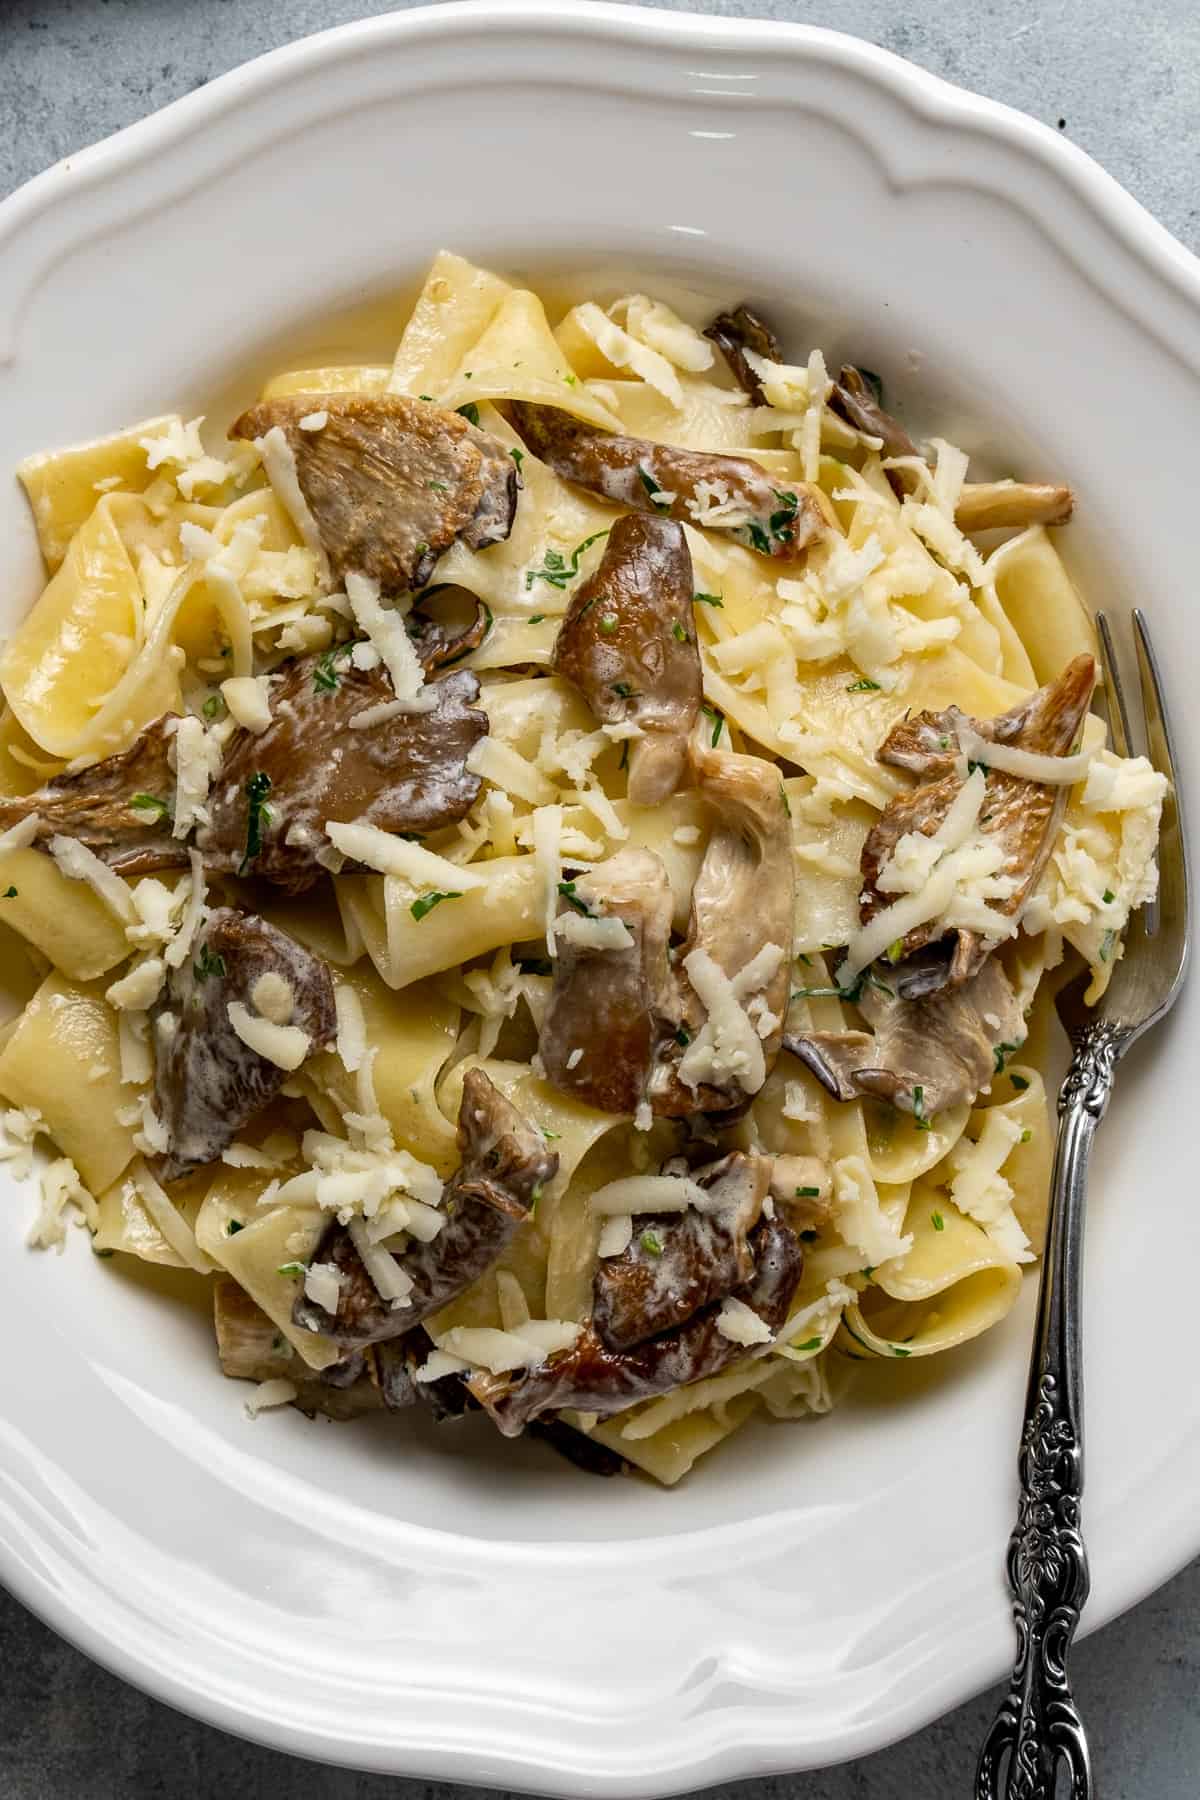 Pasta with oyster mushrooms.